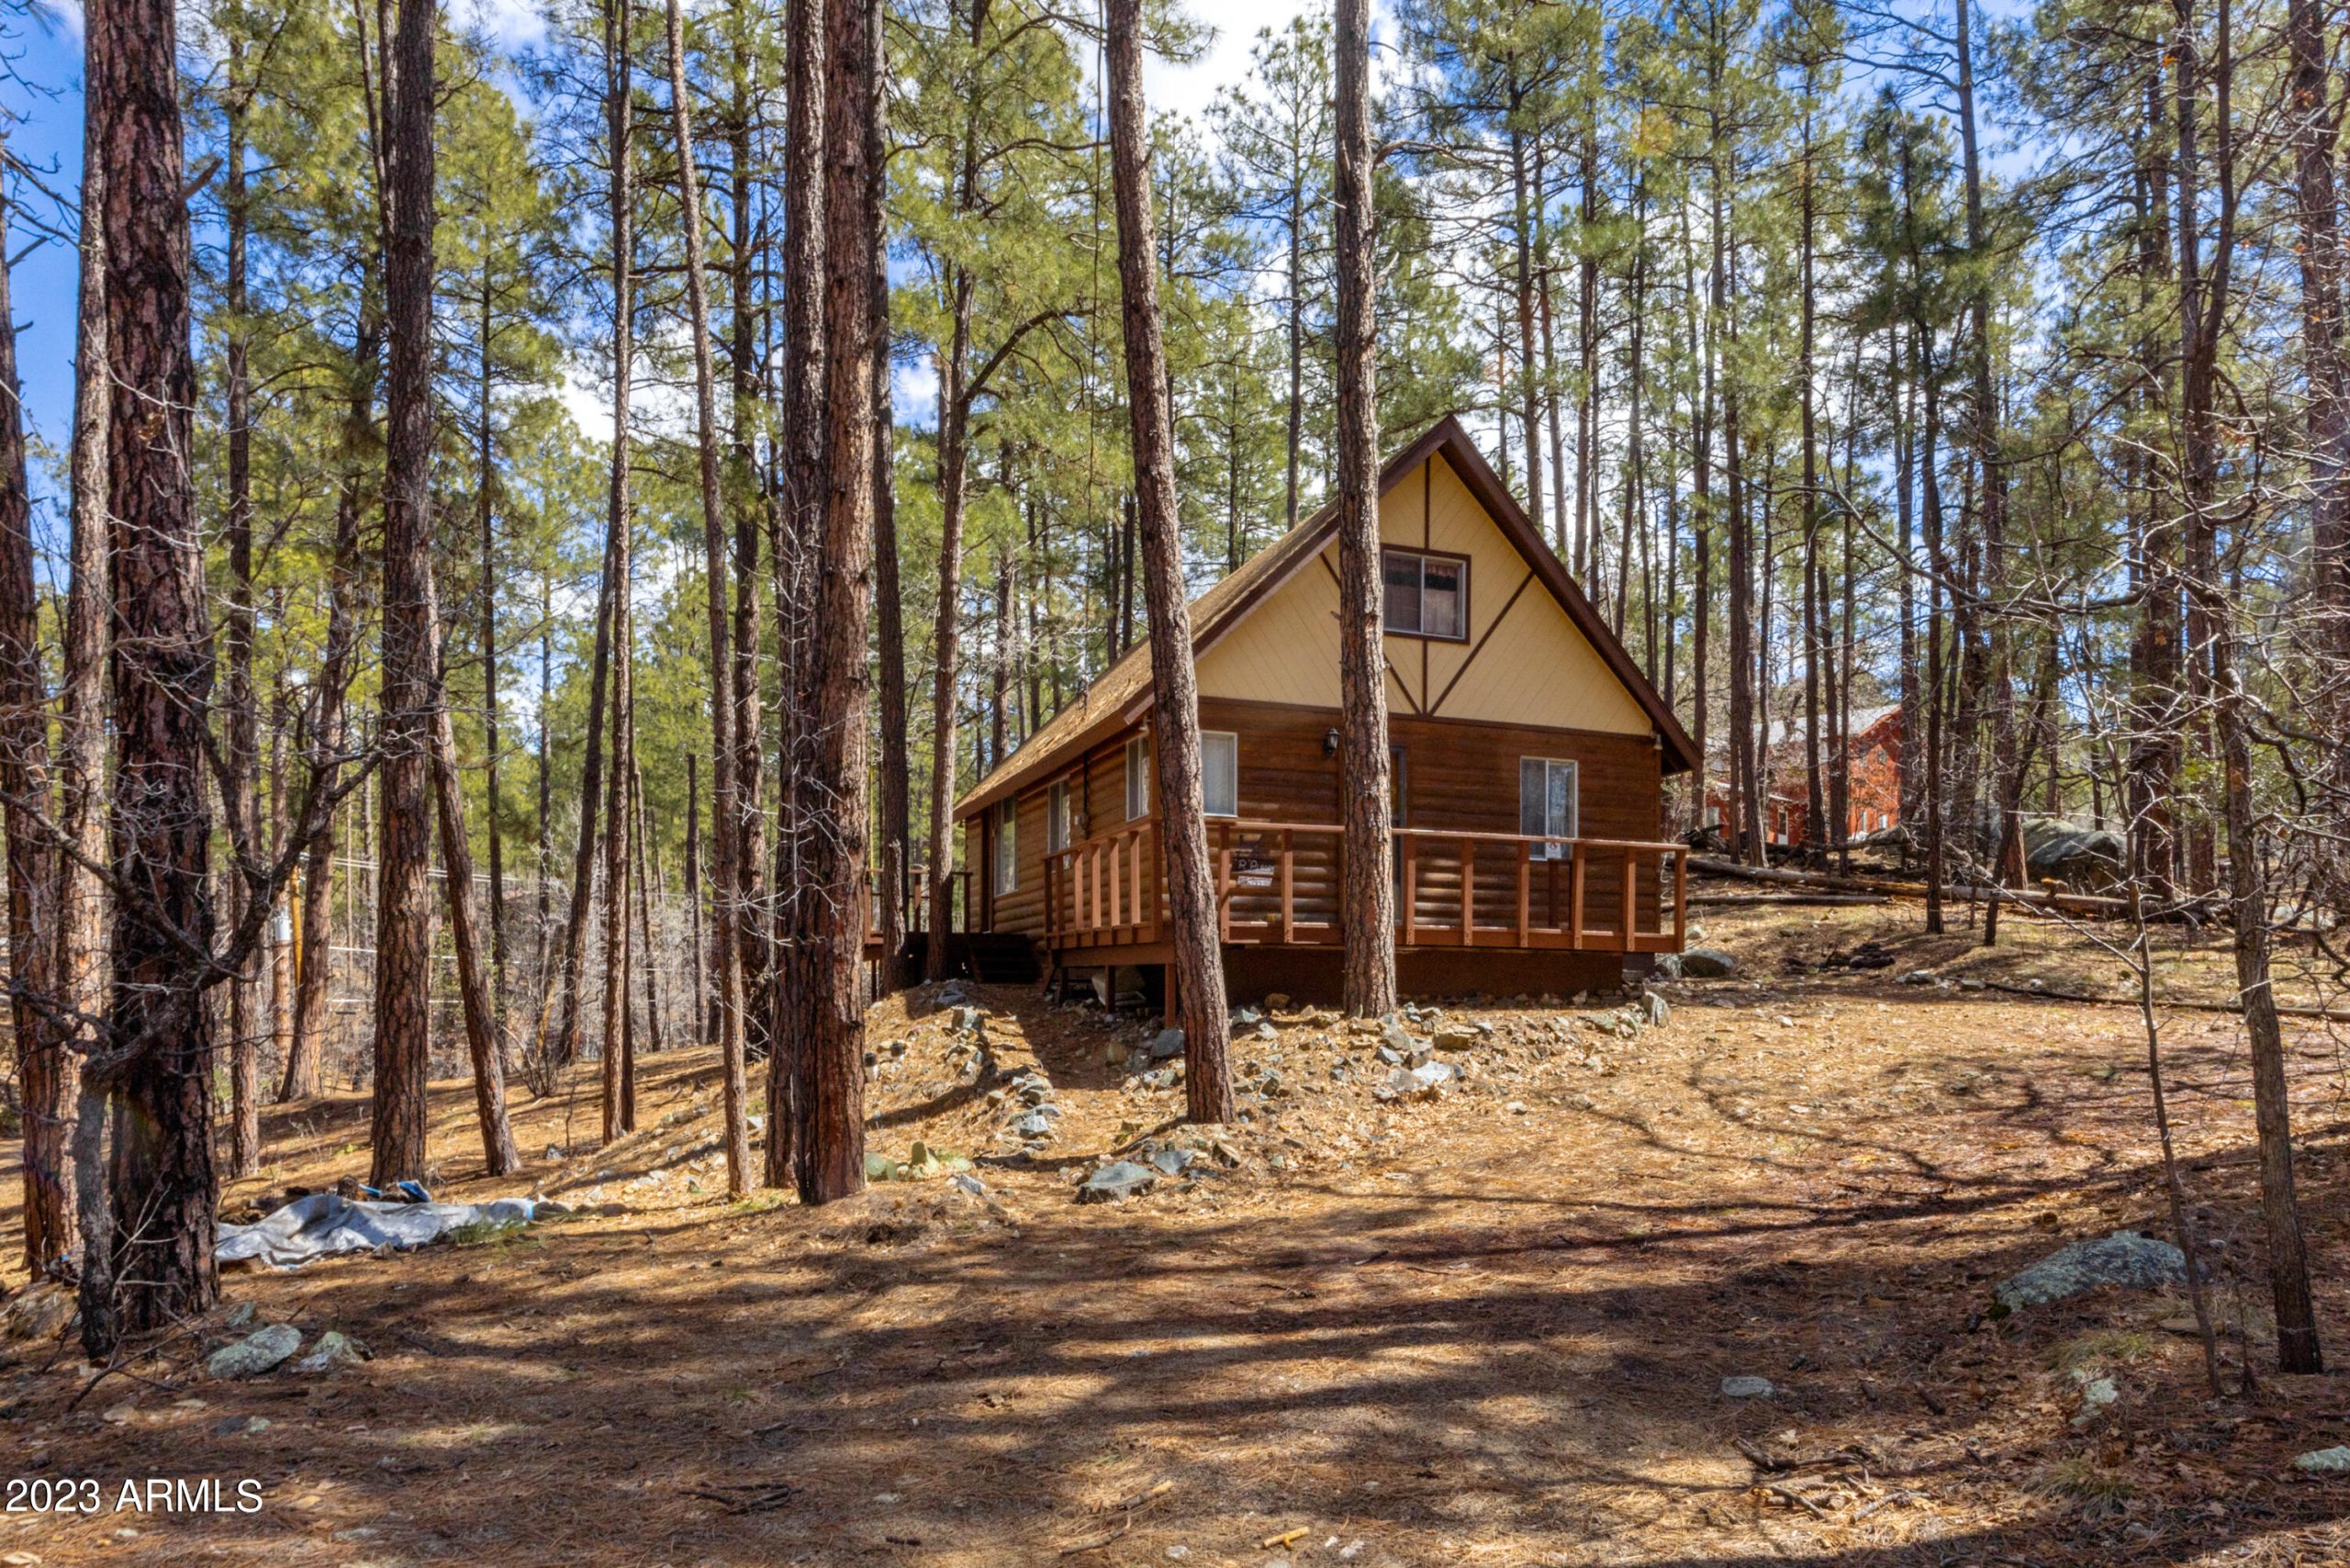 You are currently viewing Prescott cabins for sale by owner